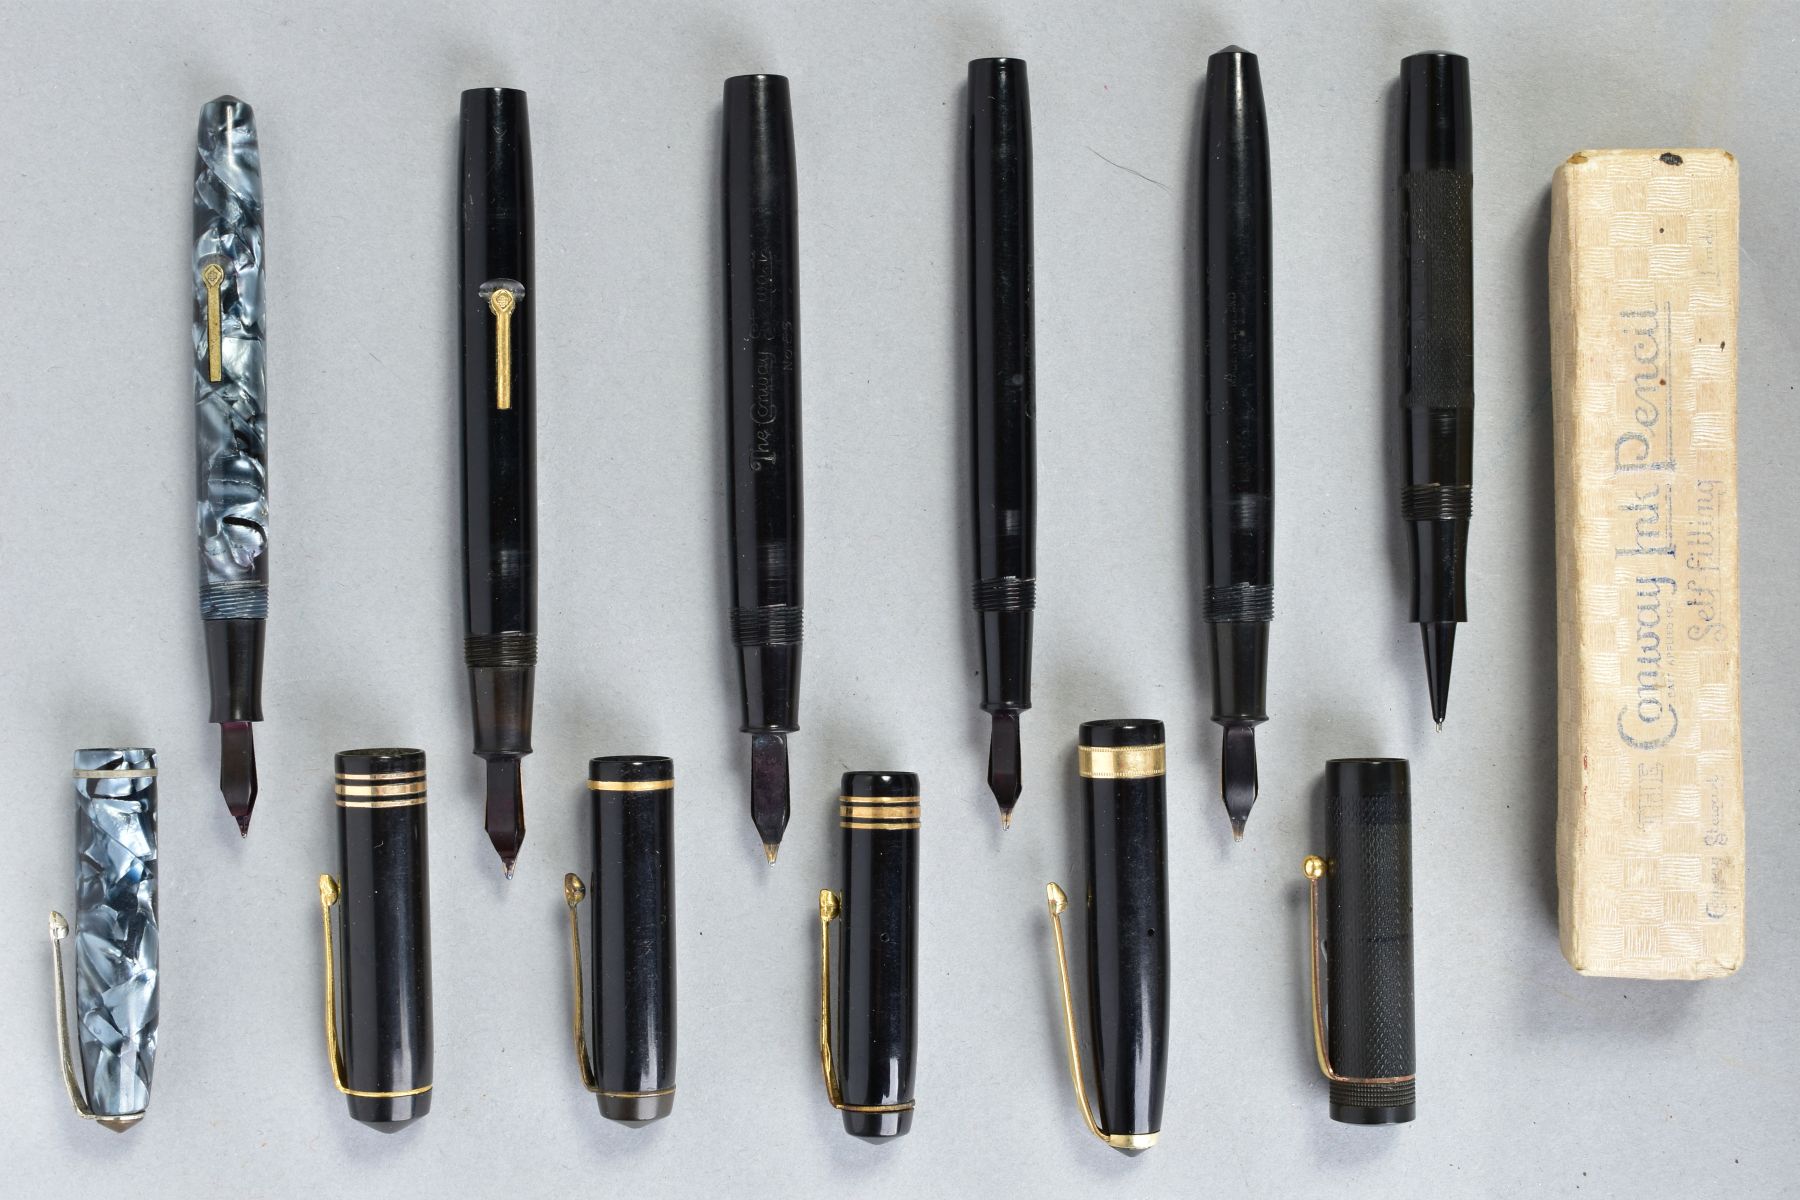 FIVE VINTAGE CONWAY STEWART FOUNTAIN PENS and a boxed Conway Stewart Ink Pencil, these include a - Image 2 of 2